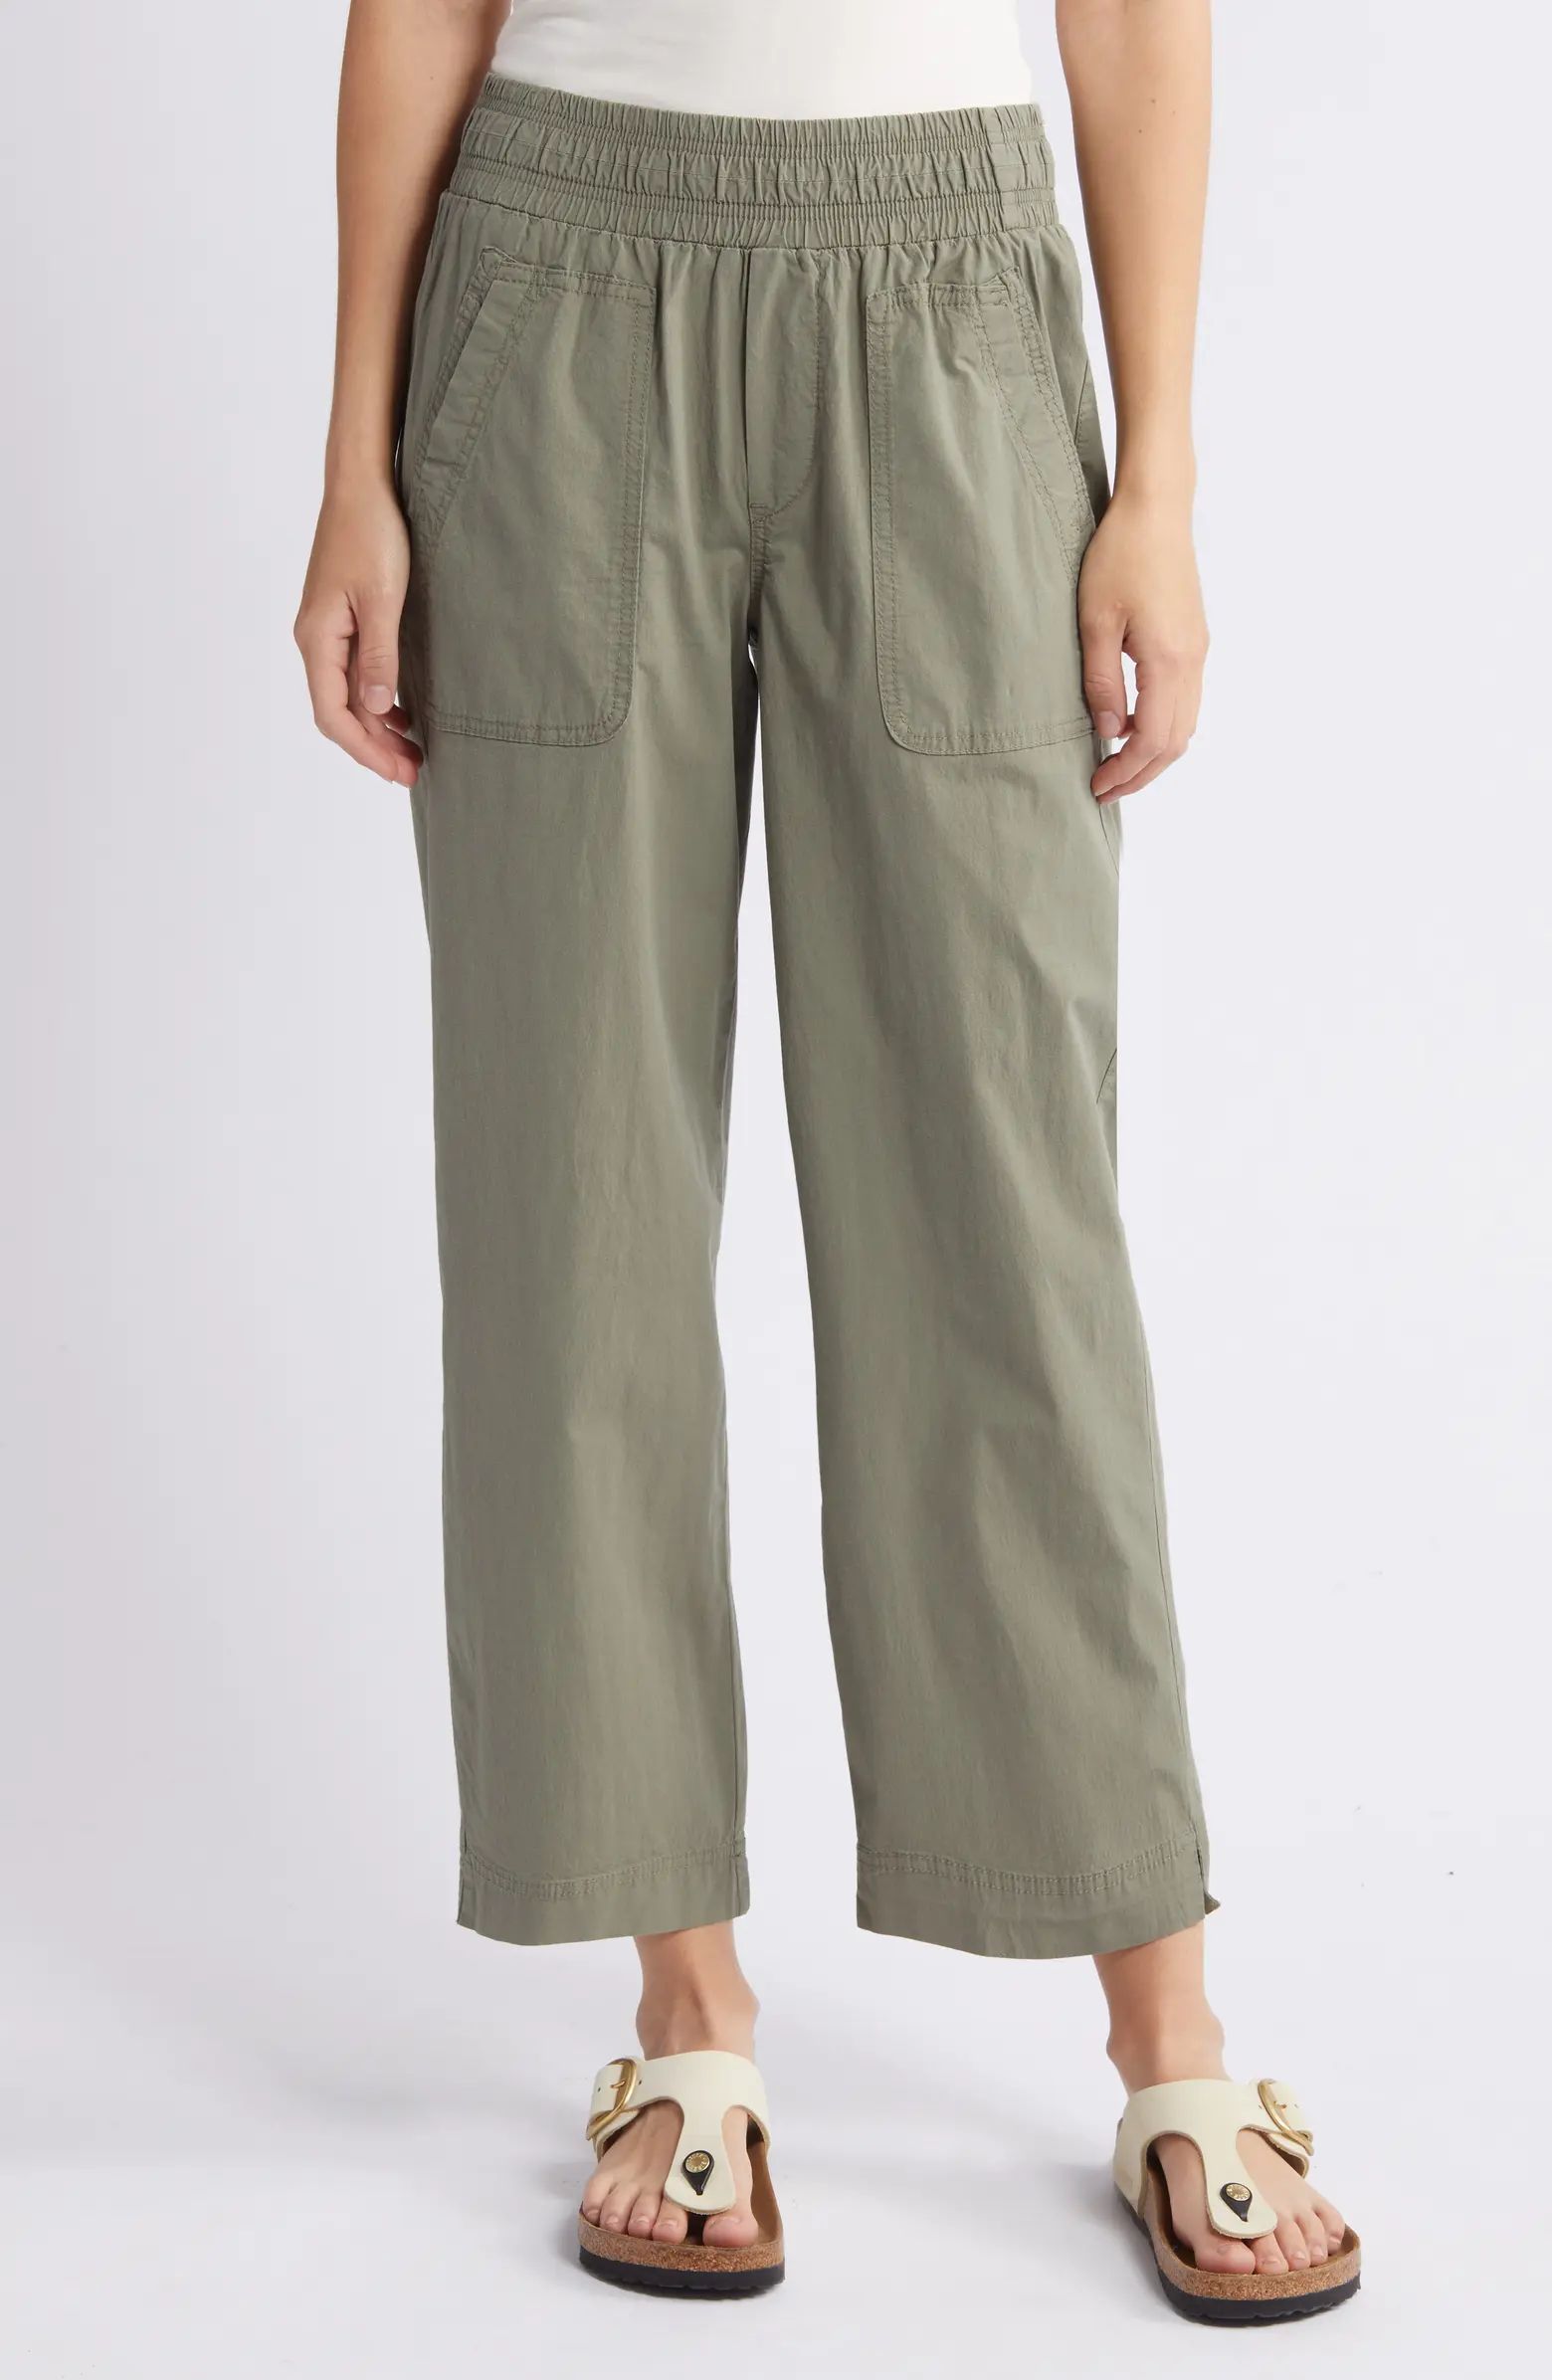 Wit & Wisdom Relaxed Straight Leg Pants | Nordstrom | Nordstrom